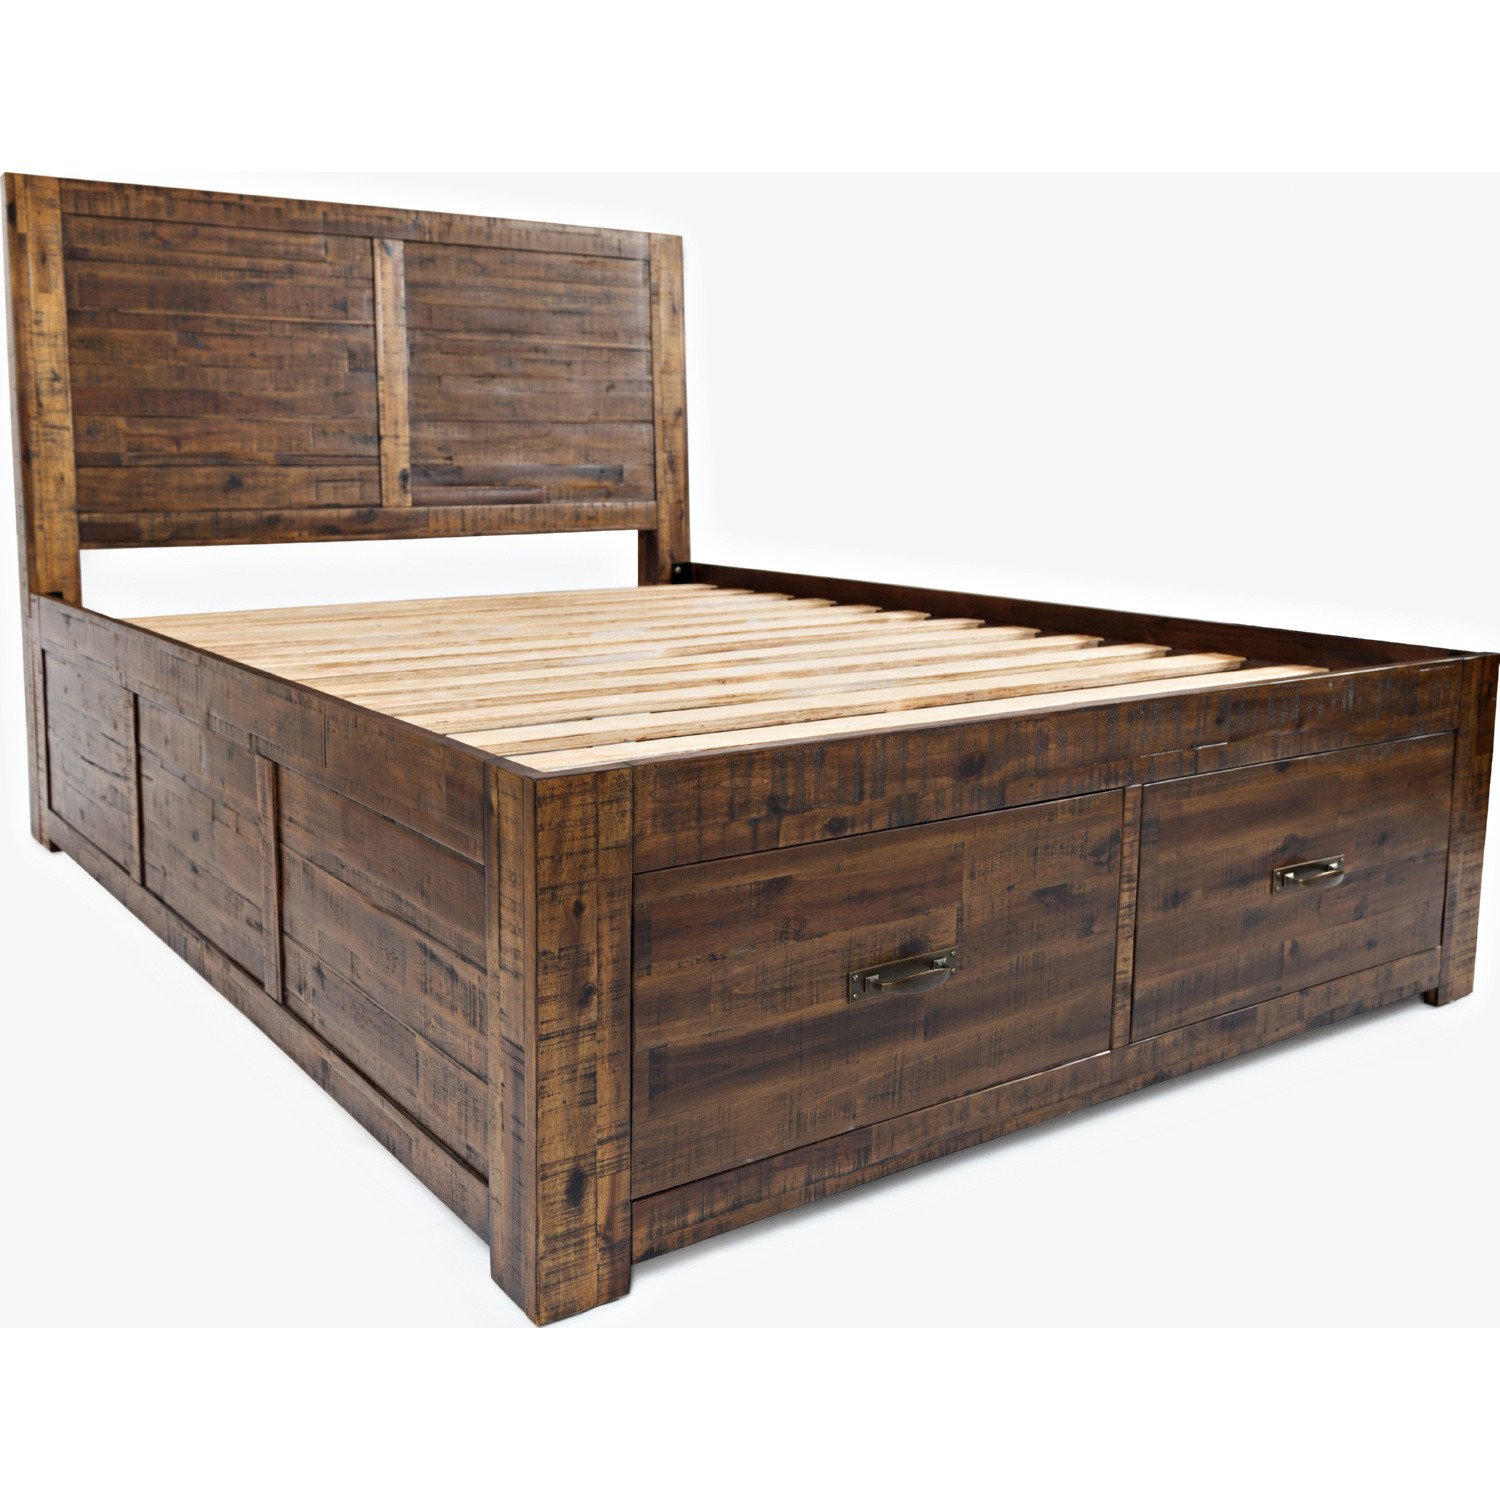 Distressed Wood Bedroom Furniture Best Of Jofran sonoma Creek Queen Storage Bed Distressed Finish In